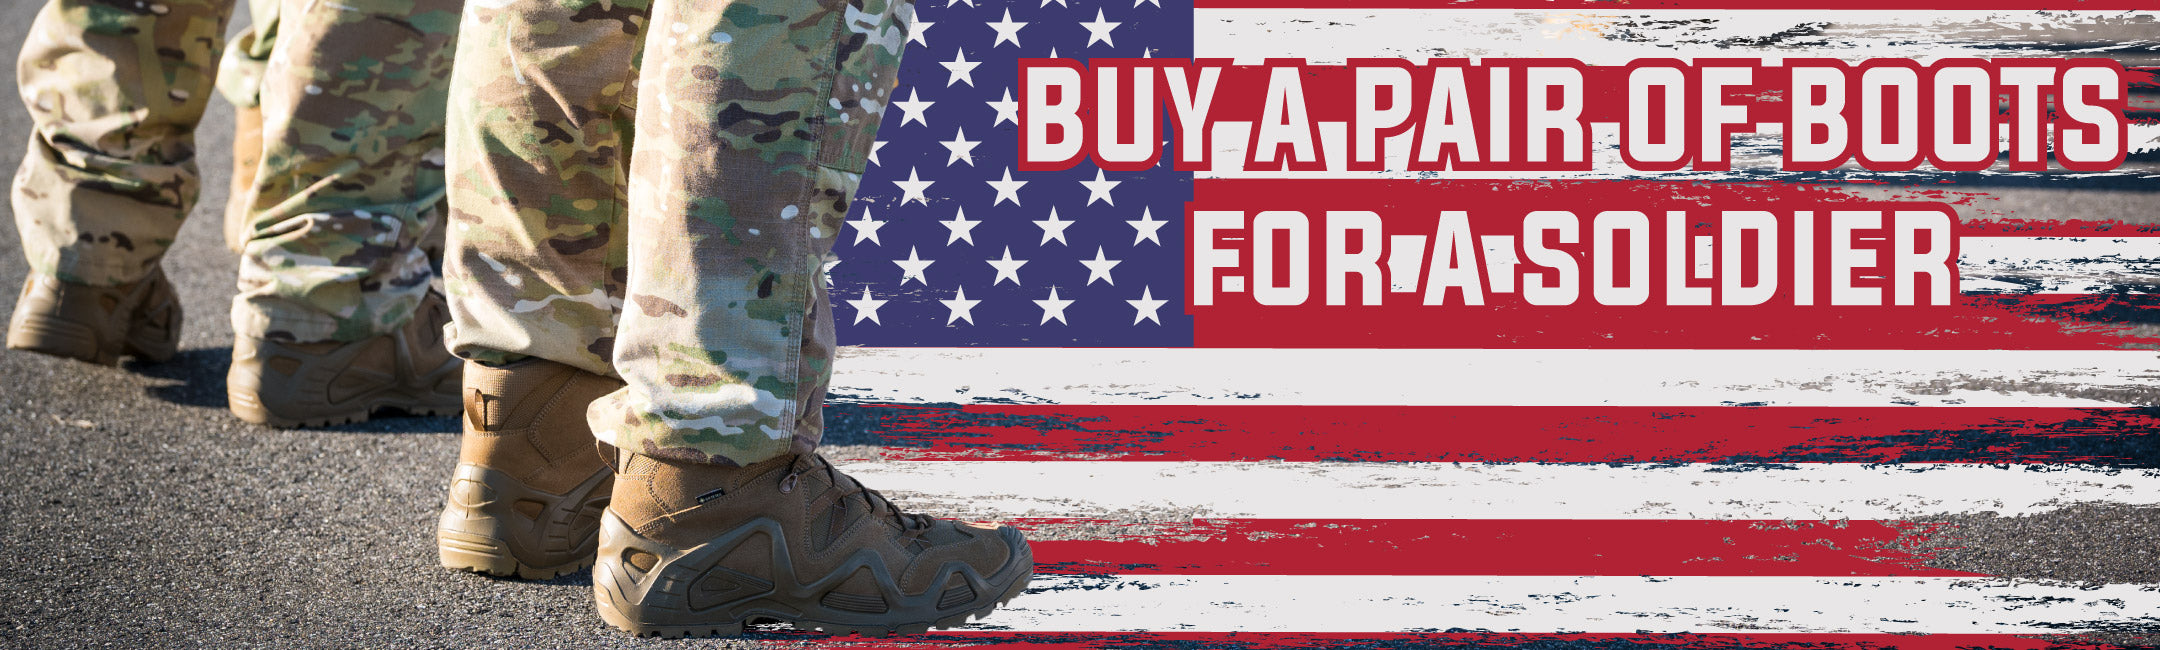 Buy a pair of boots for a soldier